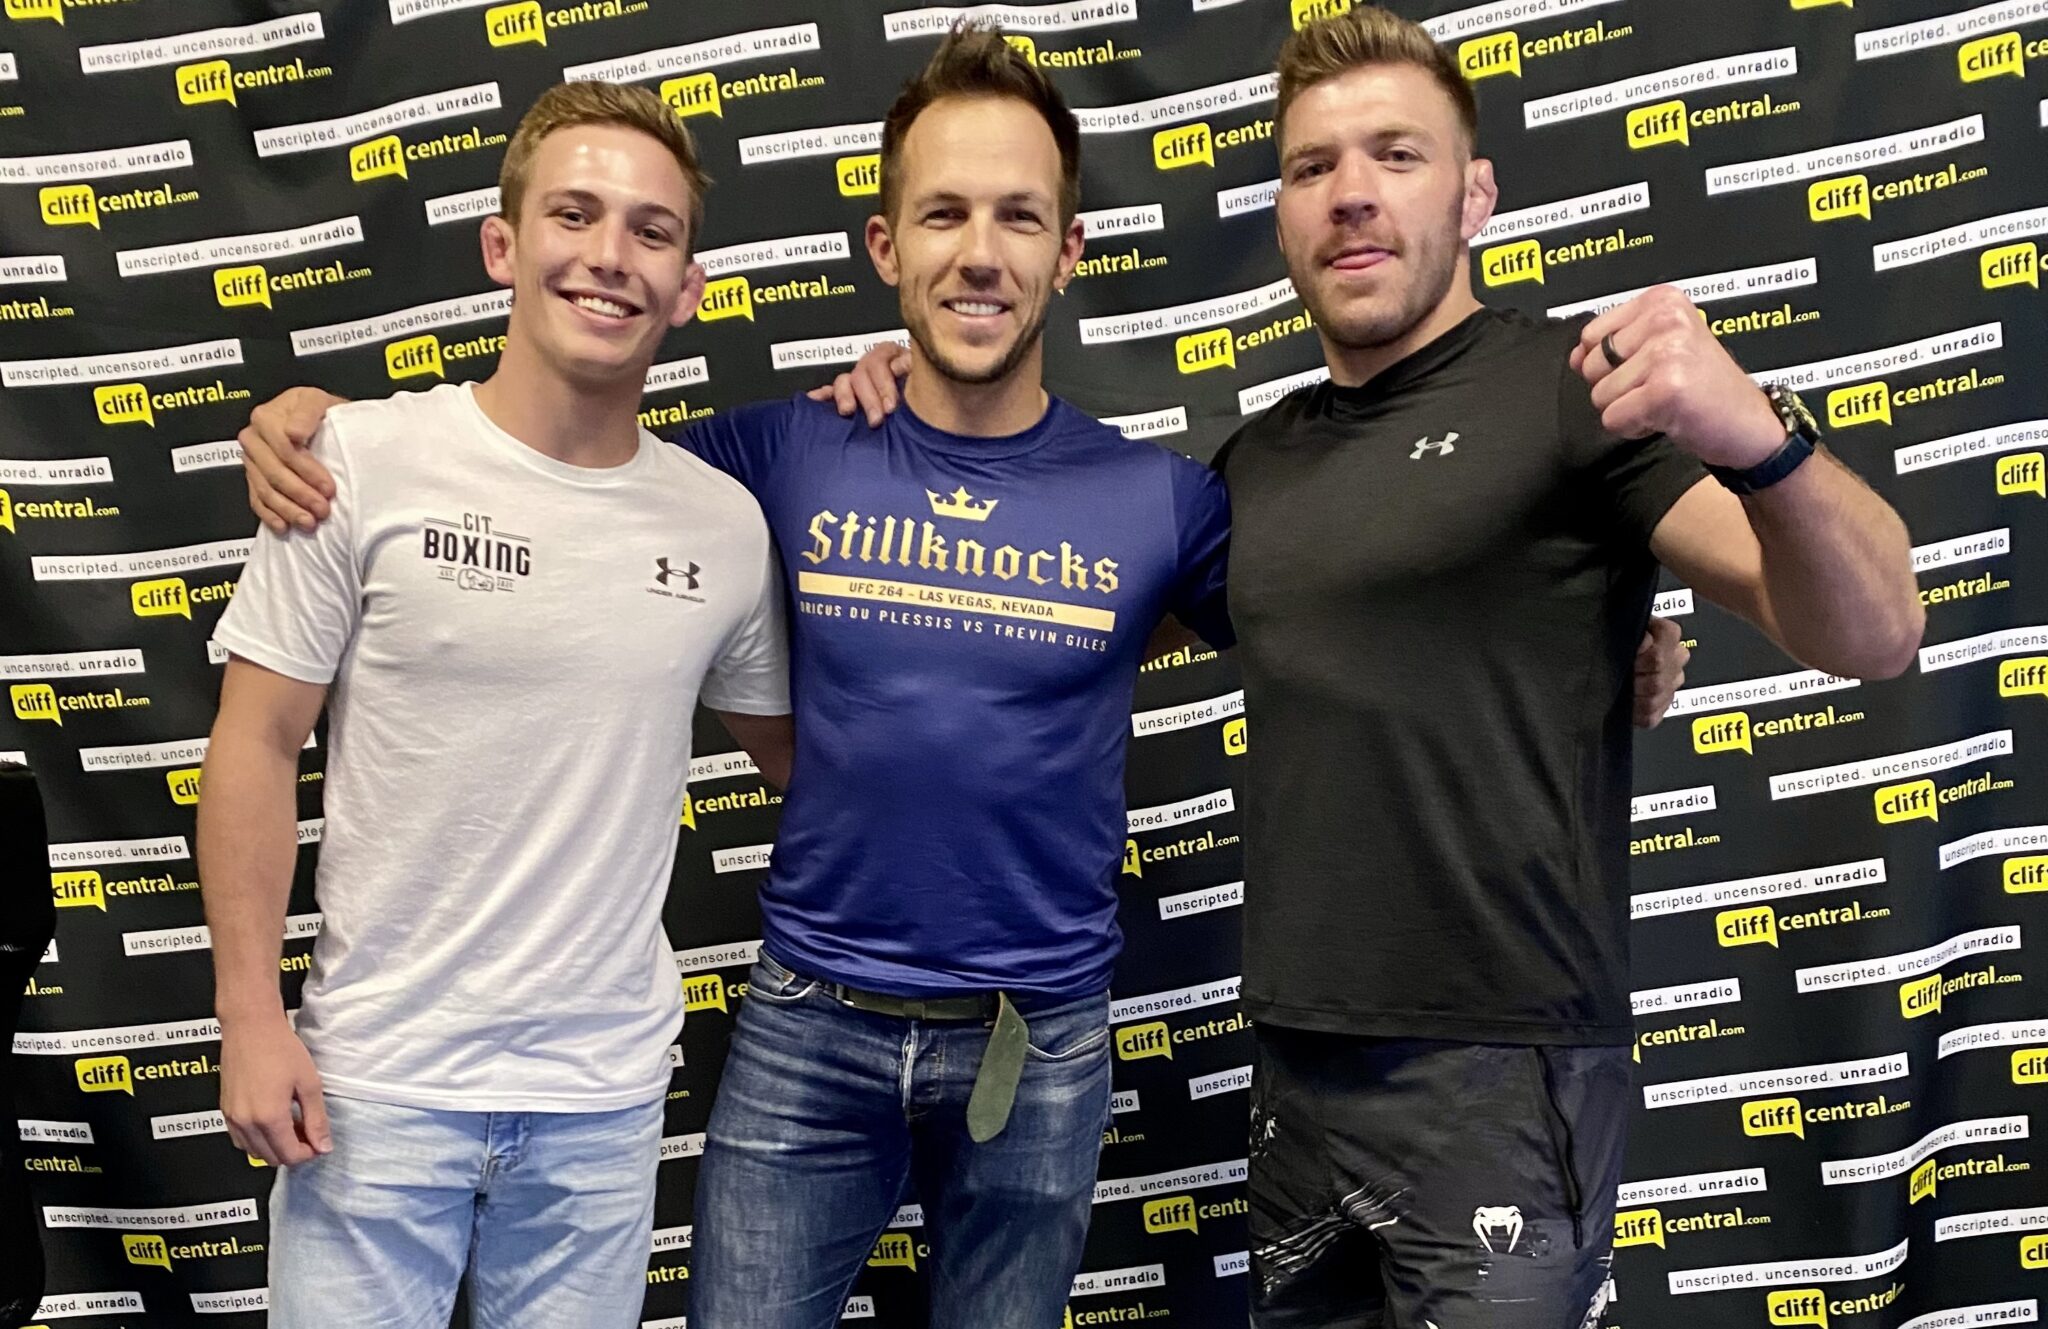 UFC preview with Dricus Du Plessis and Cameron Saaiman CliffCentral